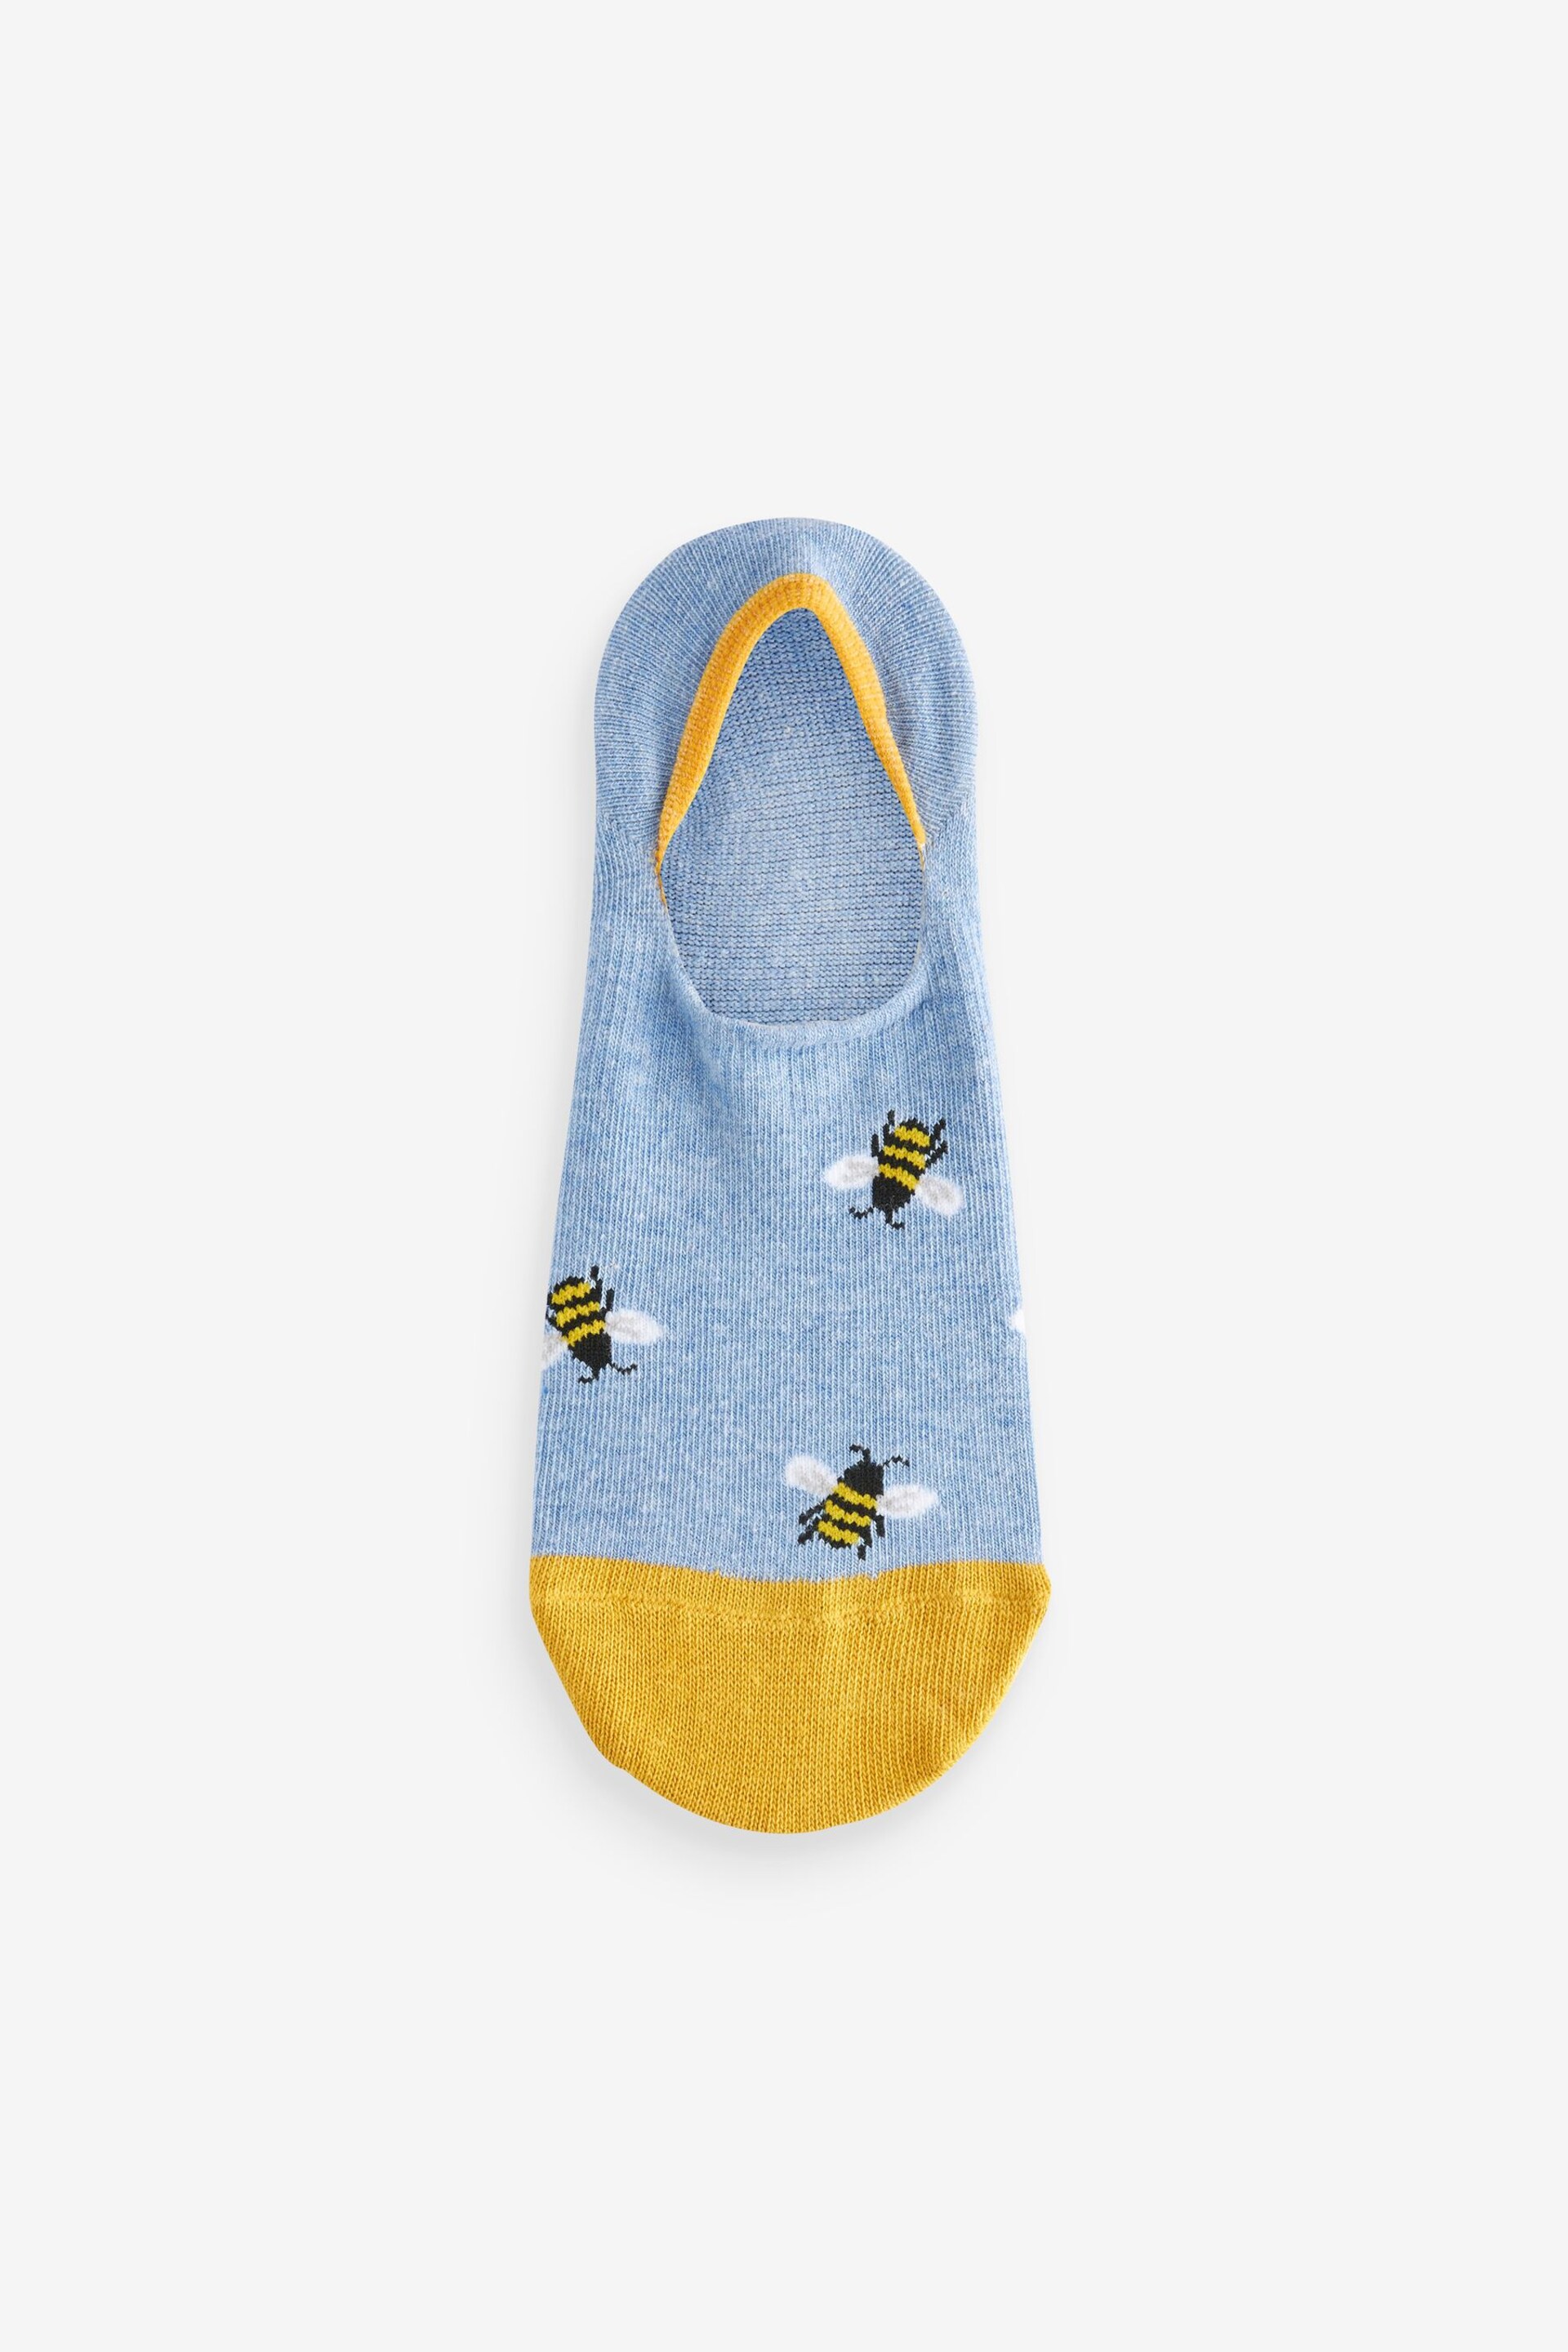 Blue Bees Invisible Socks 5 Pack - Image 5 of 6